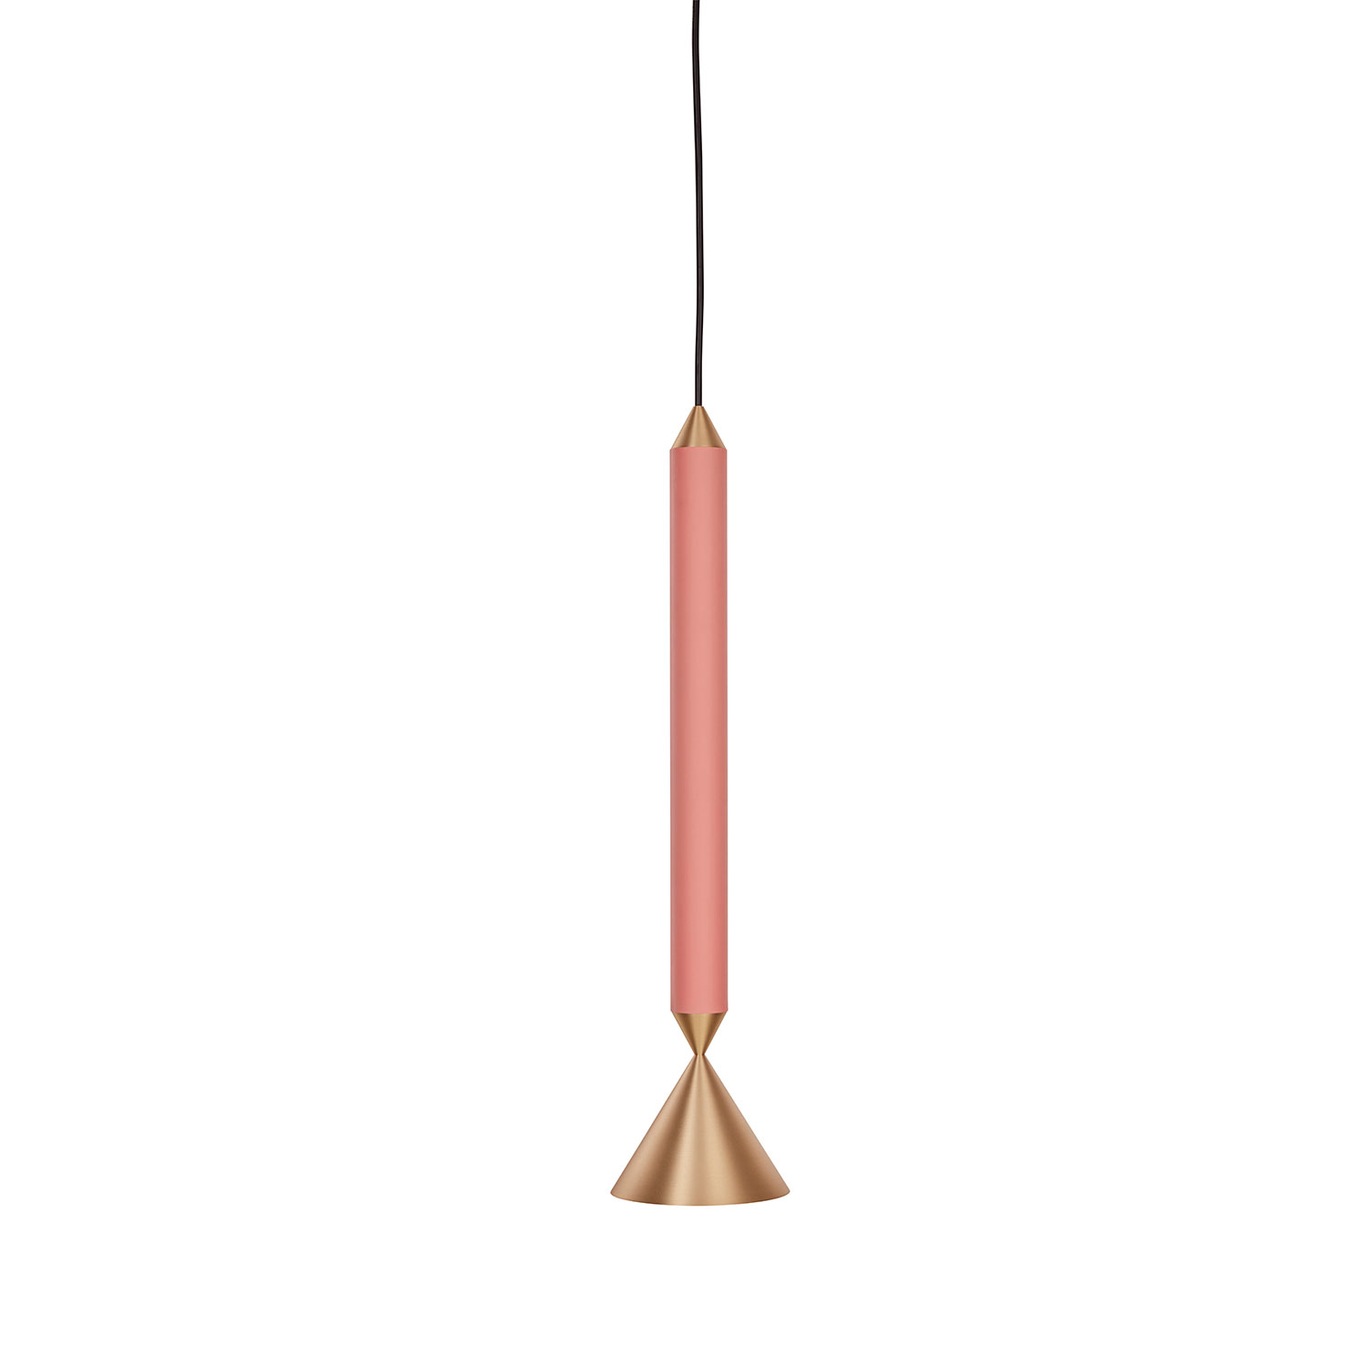 Apollo 39 Pendant, Coral Pink / Brushed Brass